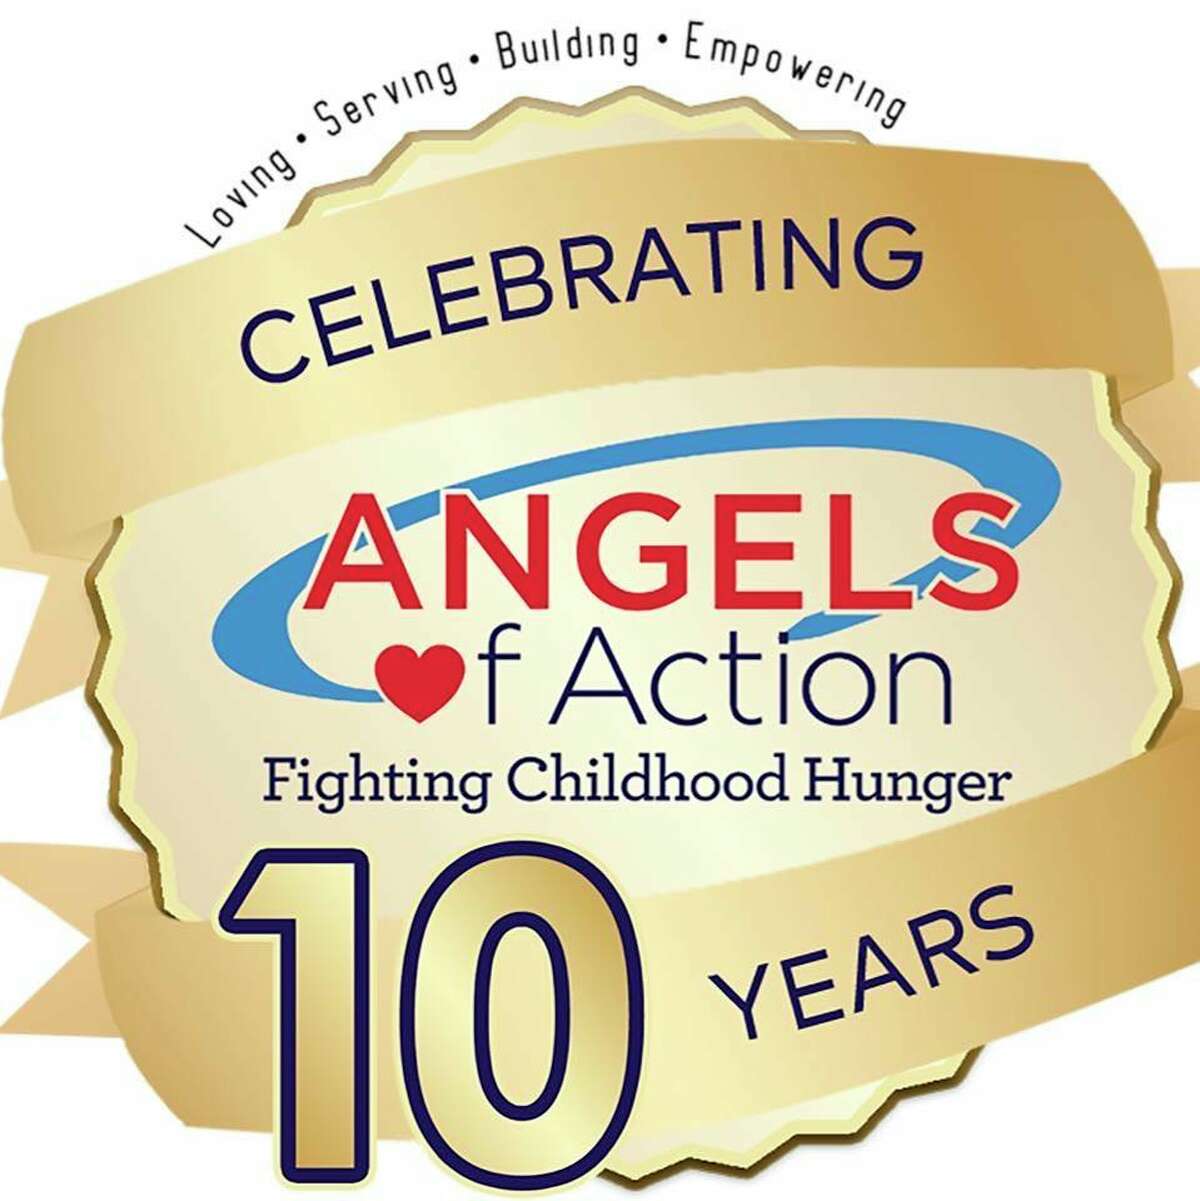 Angels of Action, a nonprofit organization working to improve the lives of children and families in the Mecosta and Osceola Counties is celebrating its 10th Anniversary on Sunday, Sept. 12. (Courtesy/Angels of Action)